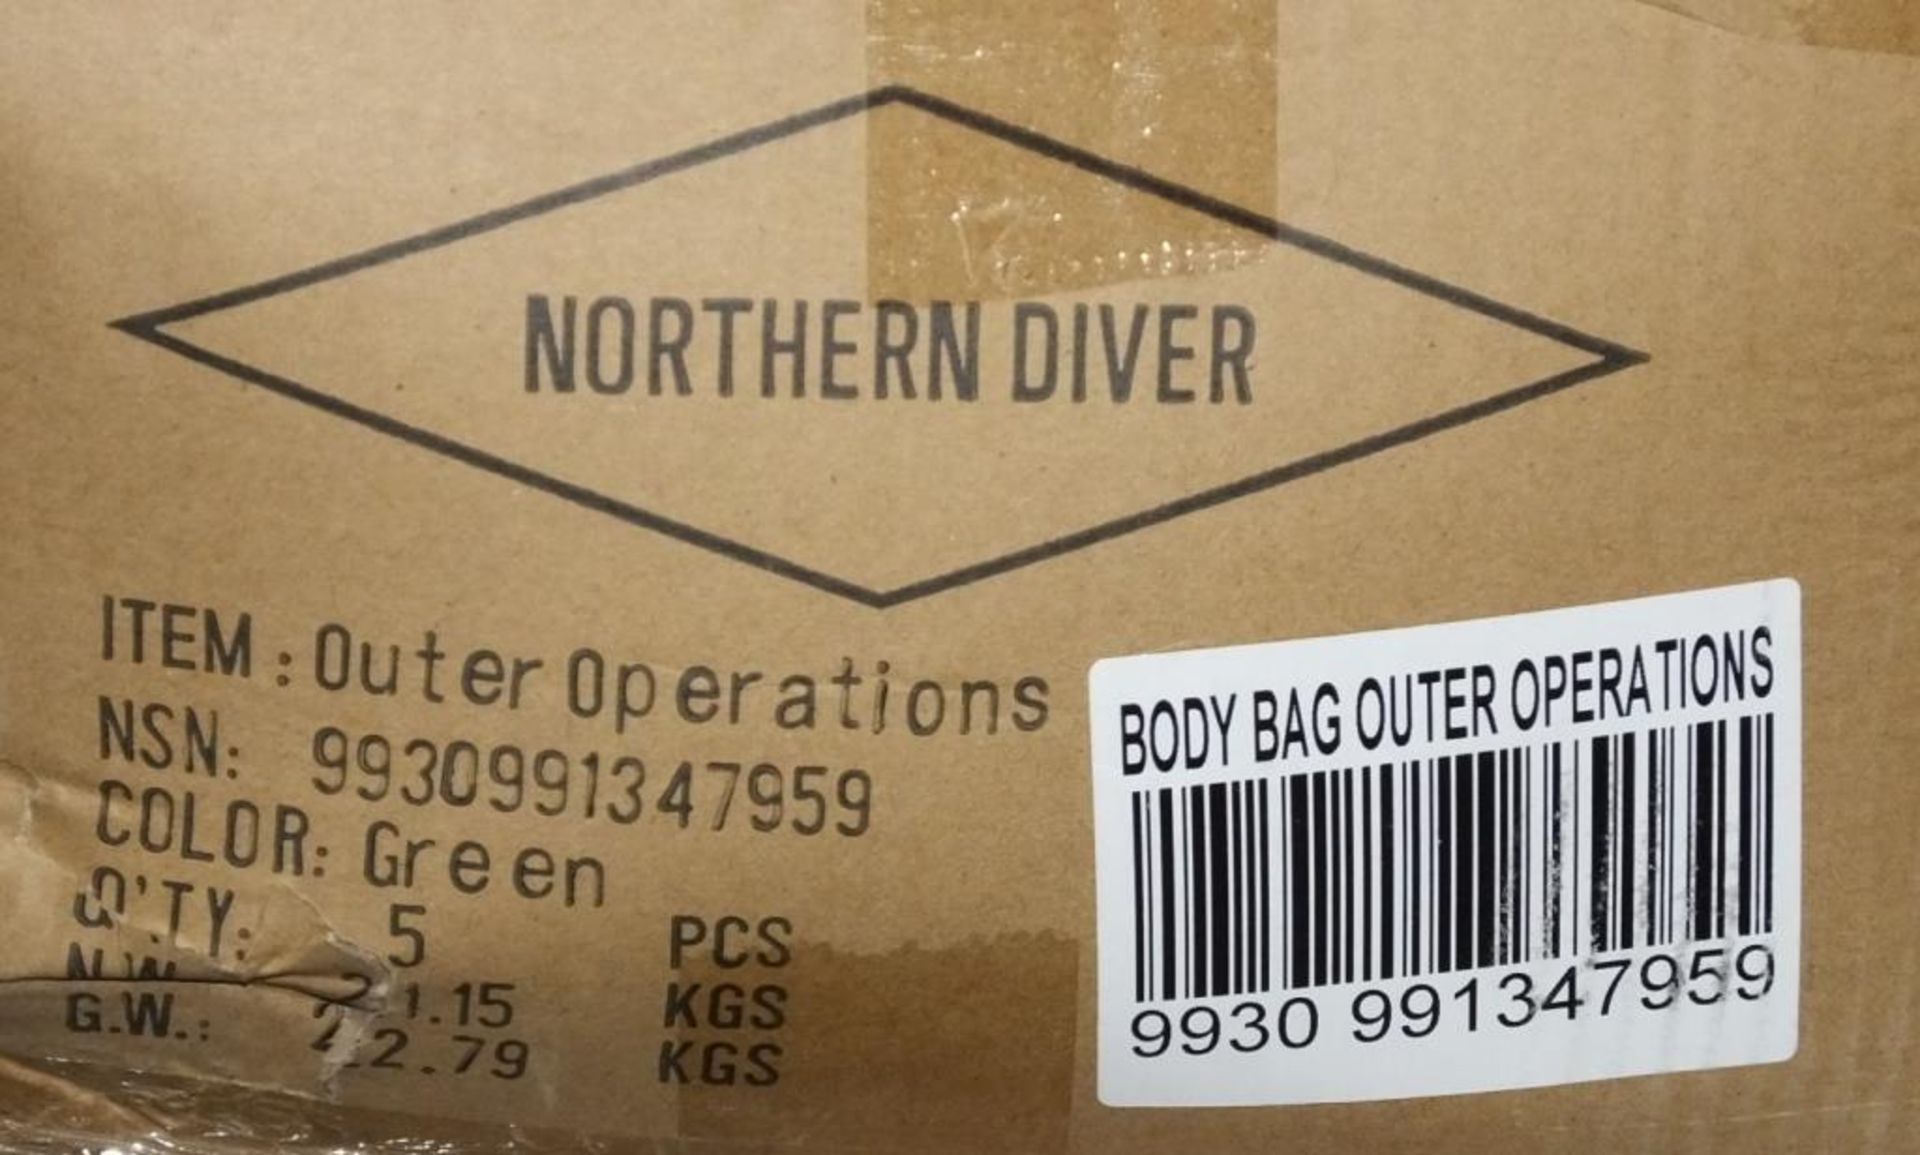 Northern Diver Body Bag Outer - Green - 5 per Box - 17 boxes - Image 2 of 2